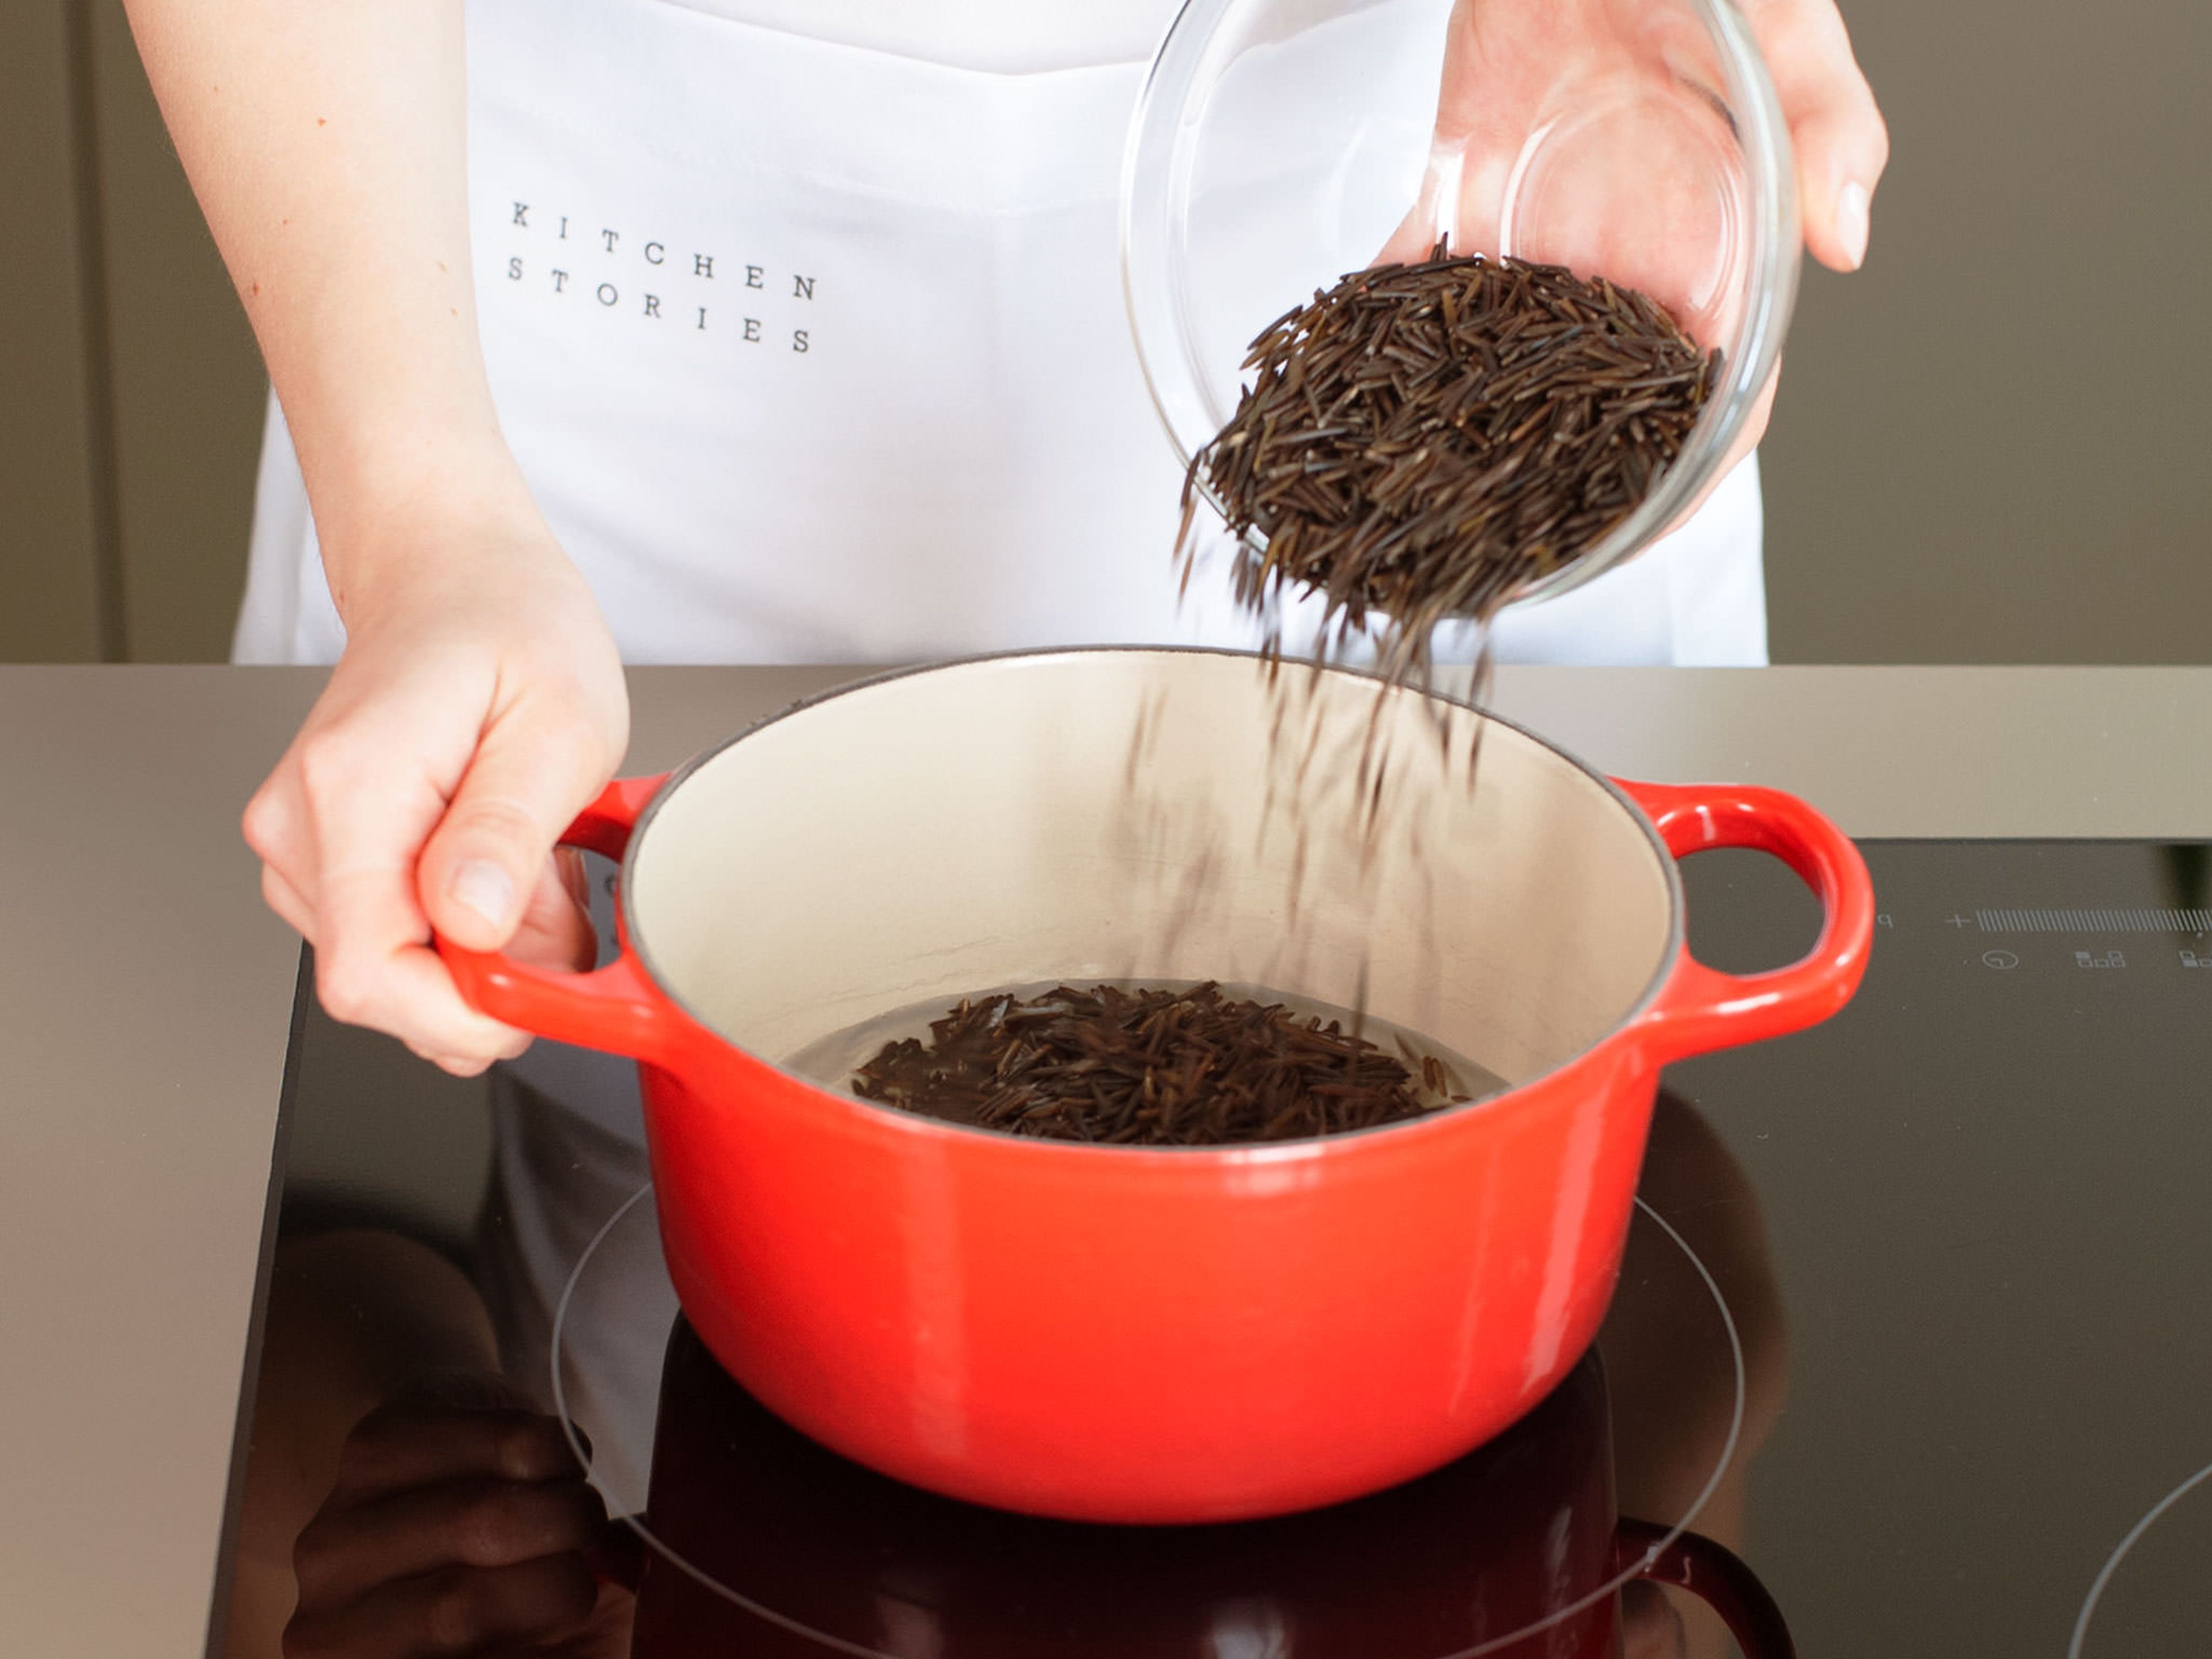 In a small saucepan, bring wild rice to a boil in salted boiling water, reduce heat to low, cover, and cook according to package instructions for approx. 35 – 40 min. Remove from heat and set aside.